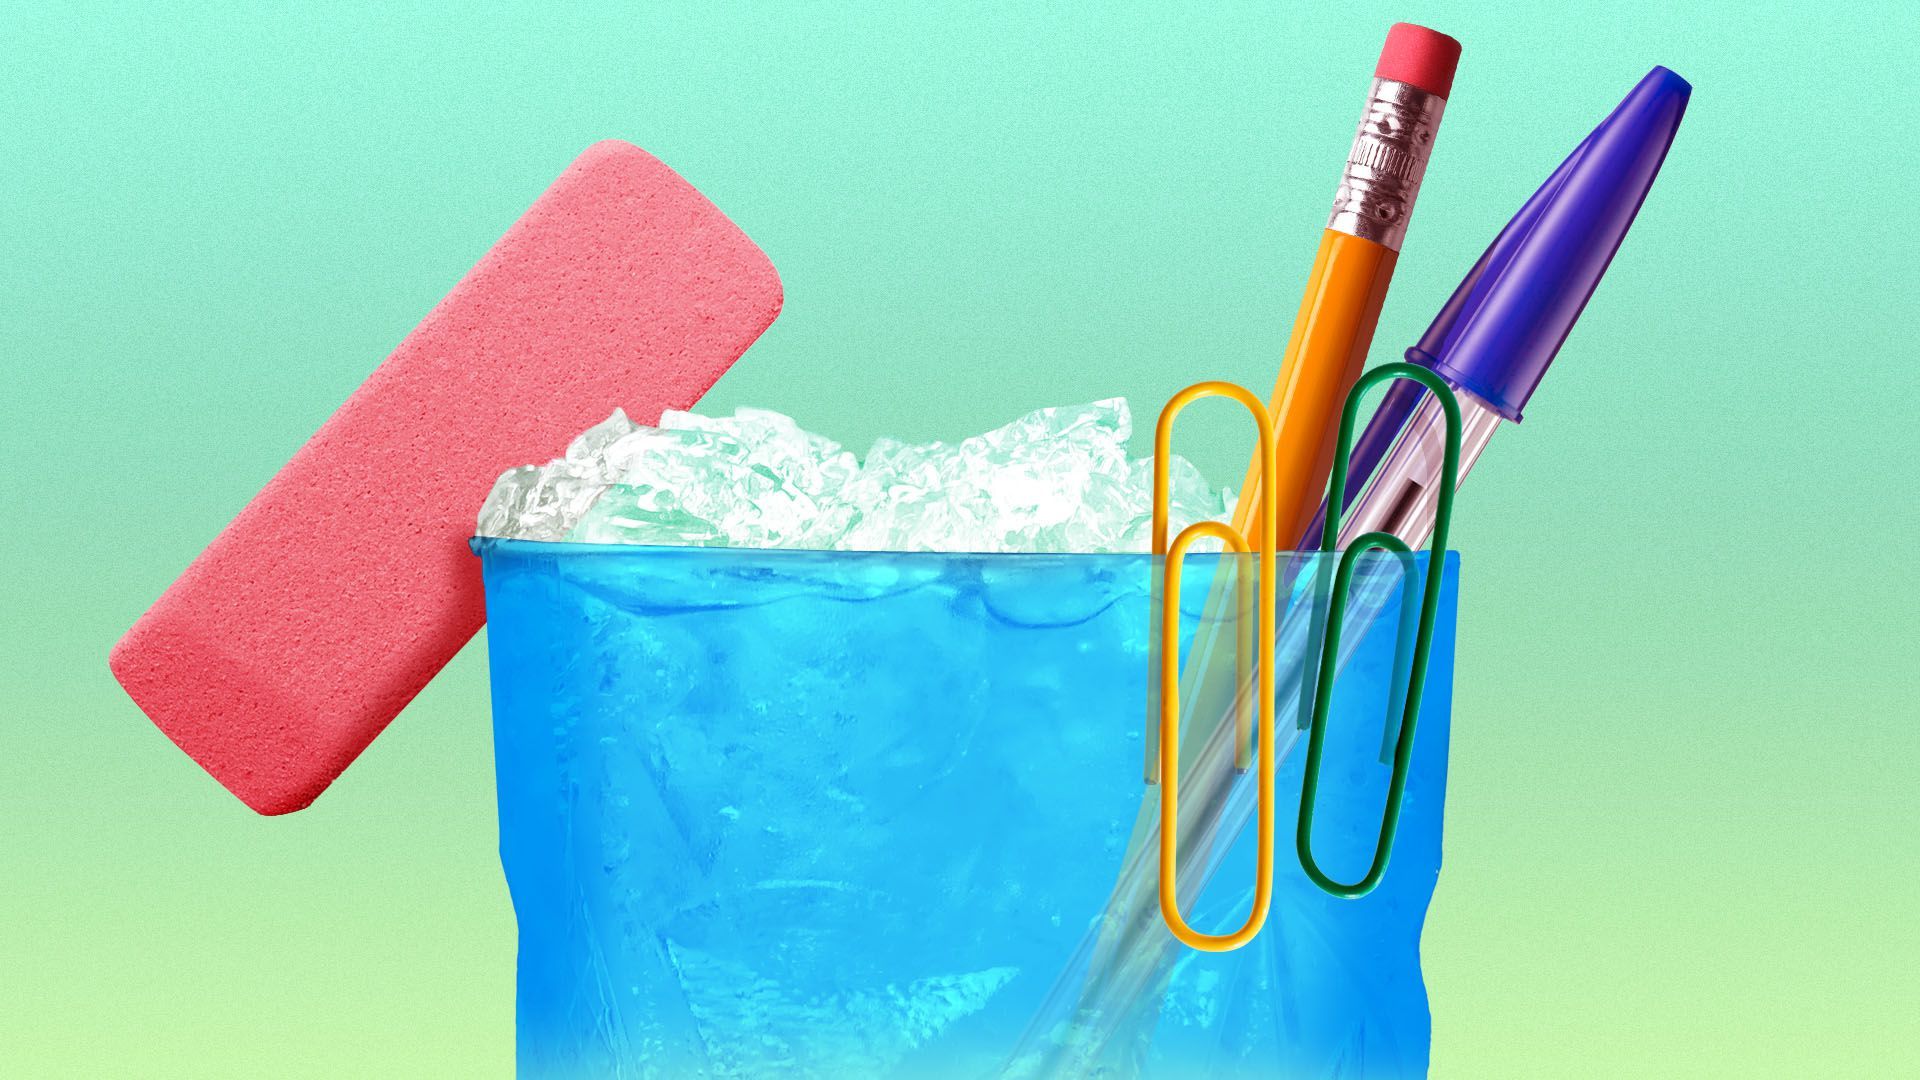 Illustration of a tropical cocktail garnished with office supplies